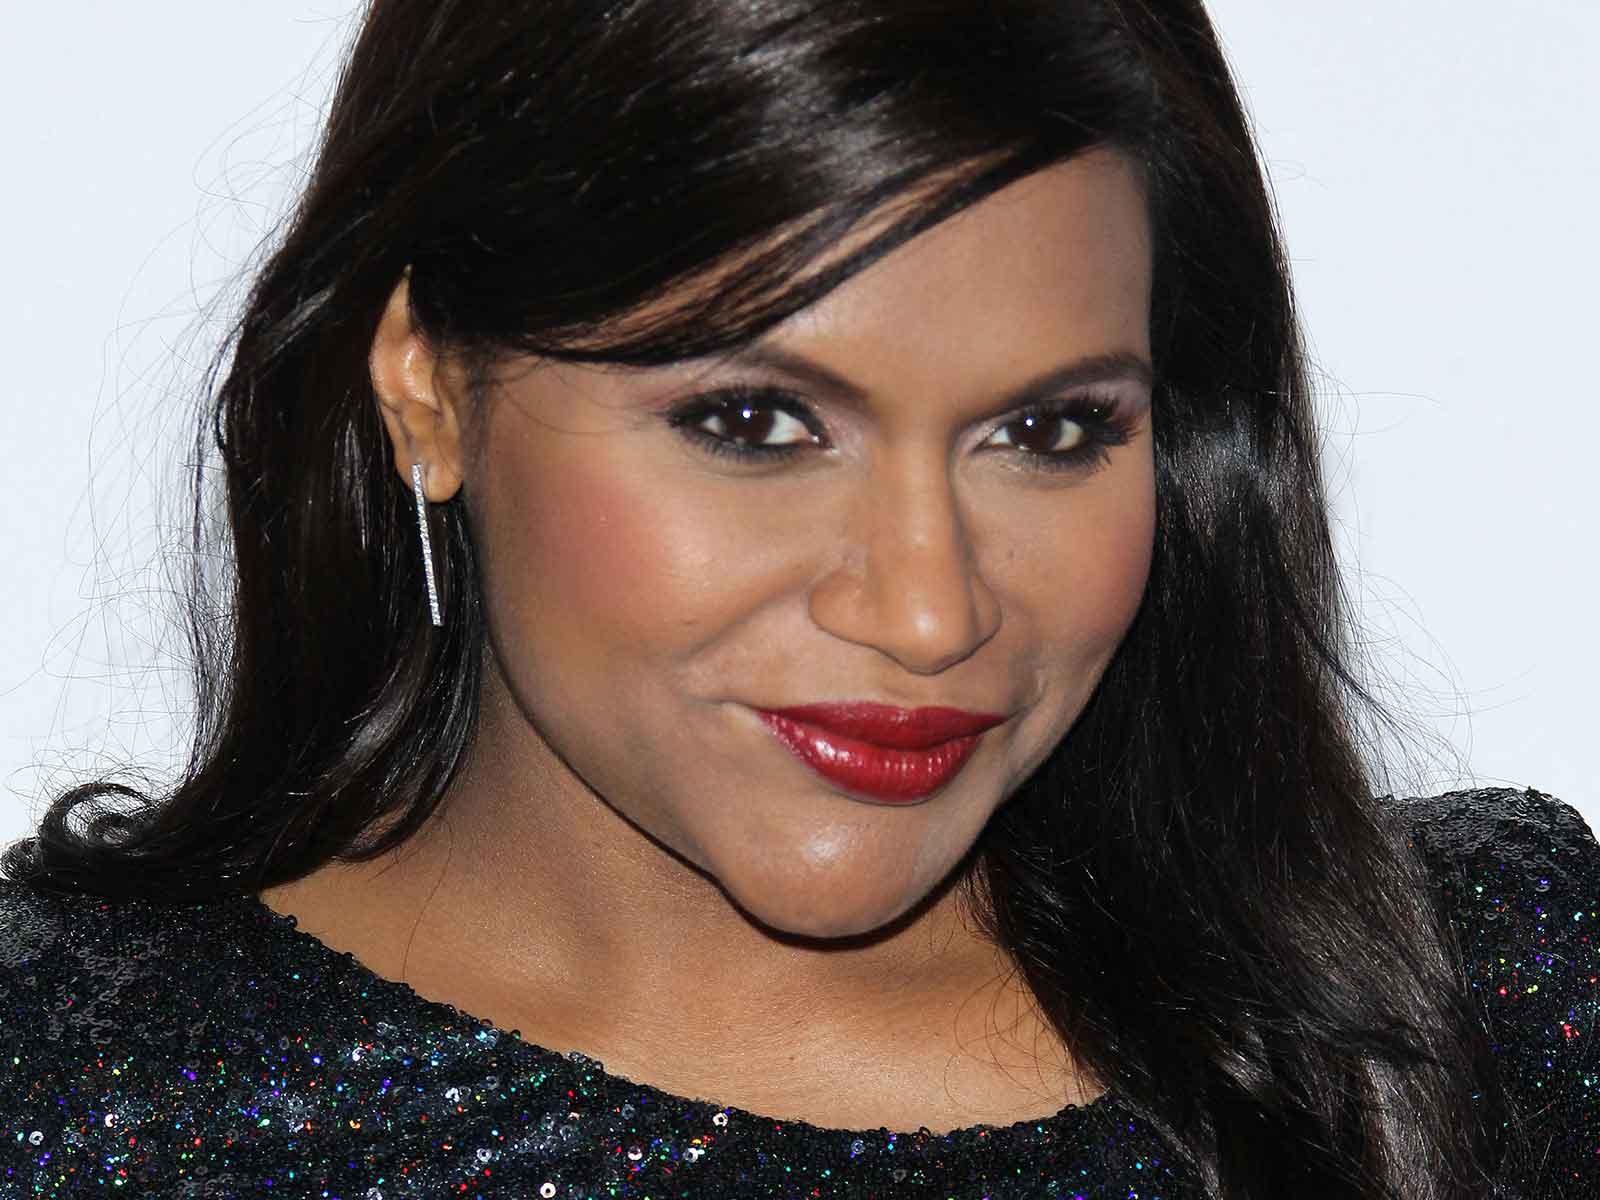 Mindy Kaling Didn’t Name Father of New Baby on Birth Certificate